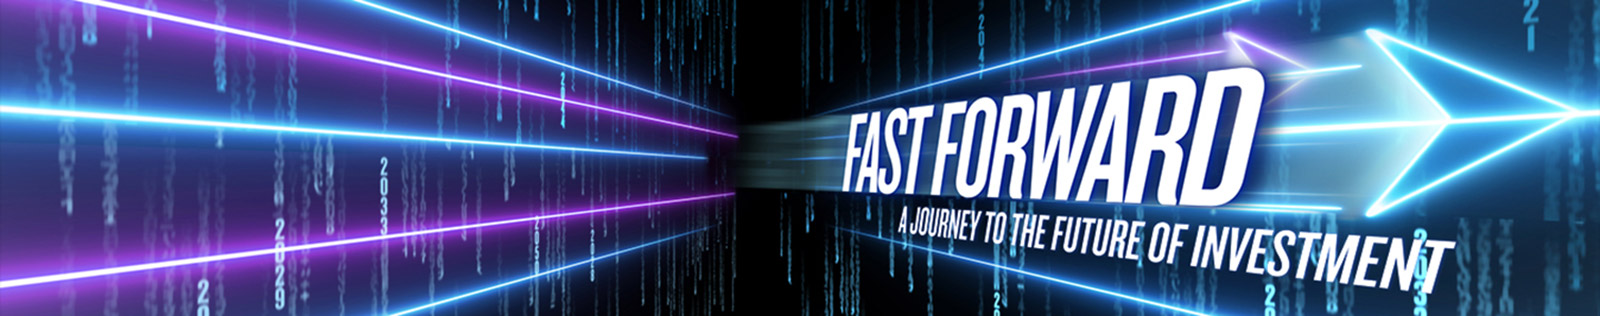 Fast Forward. A journey to the future of investment.